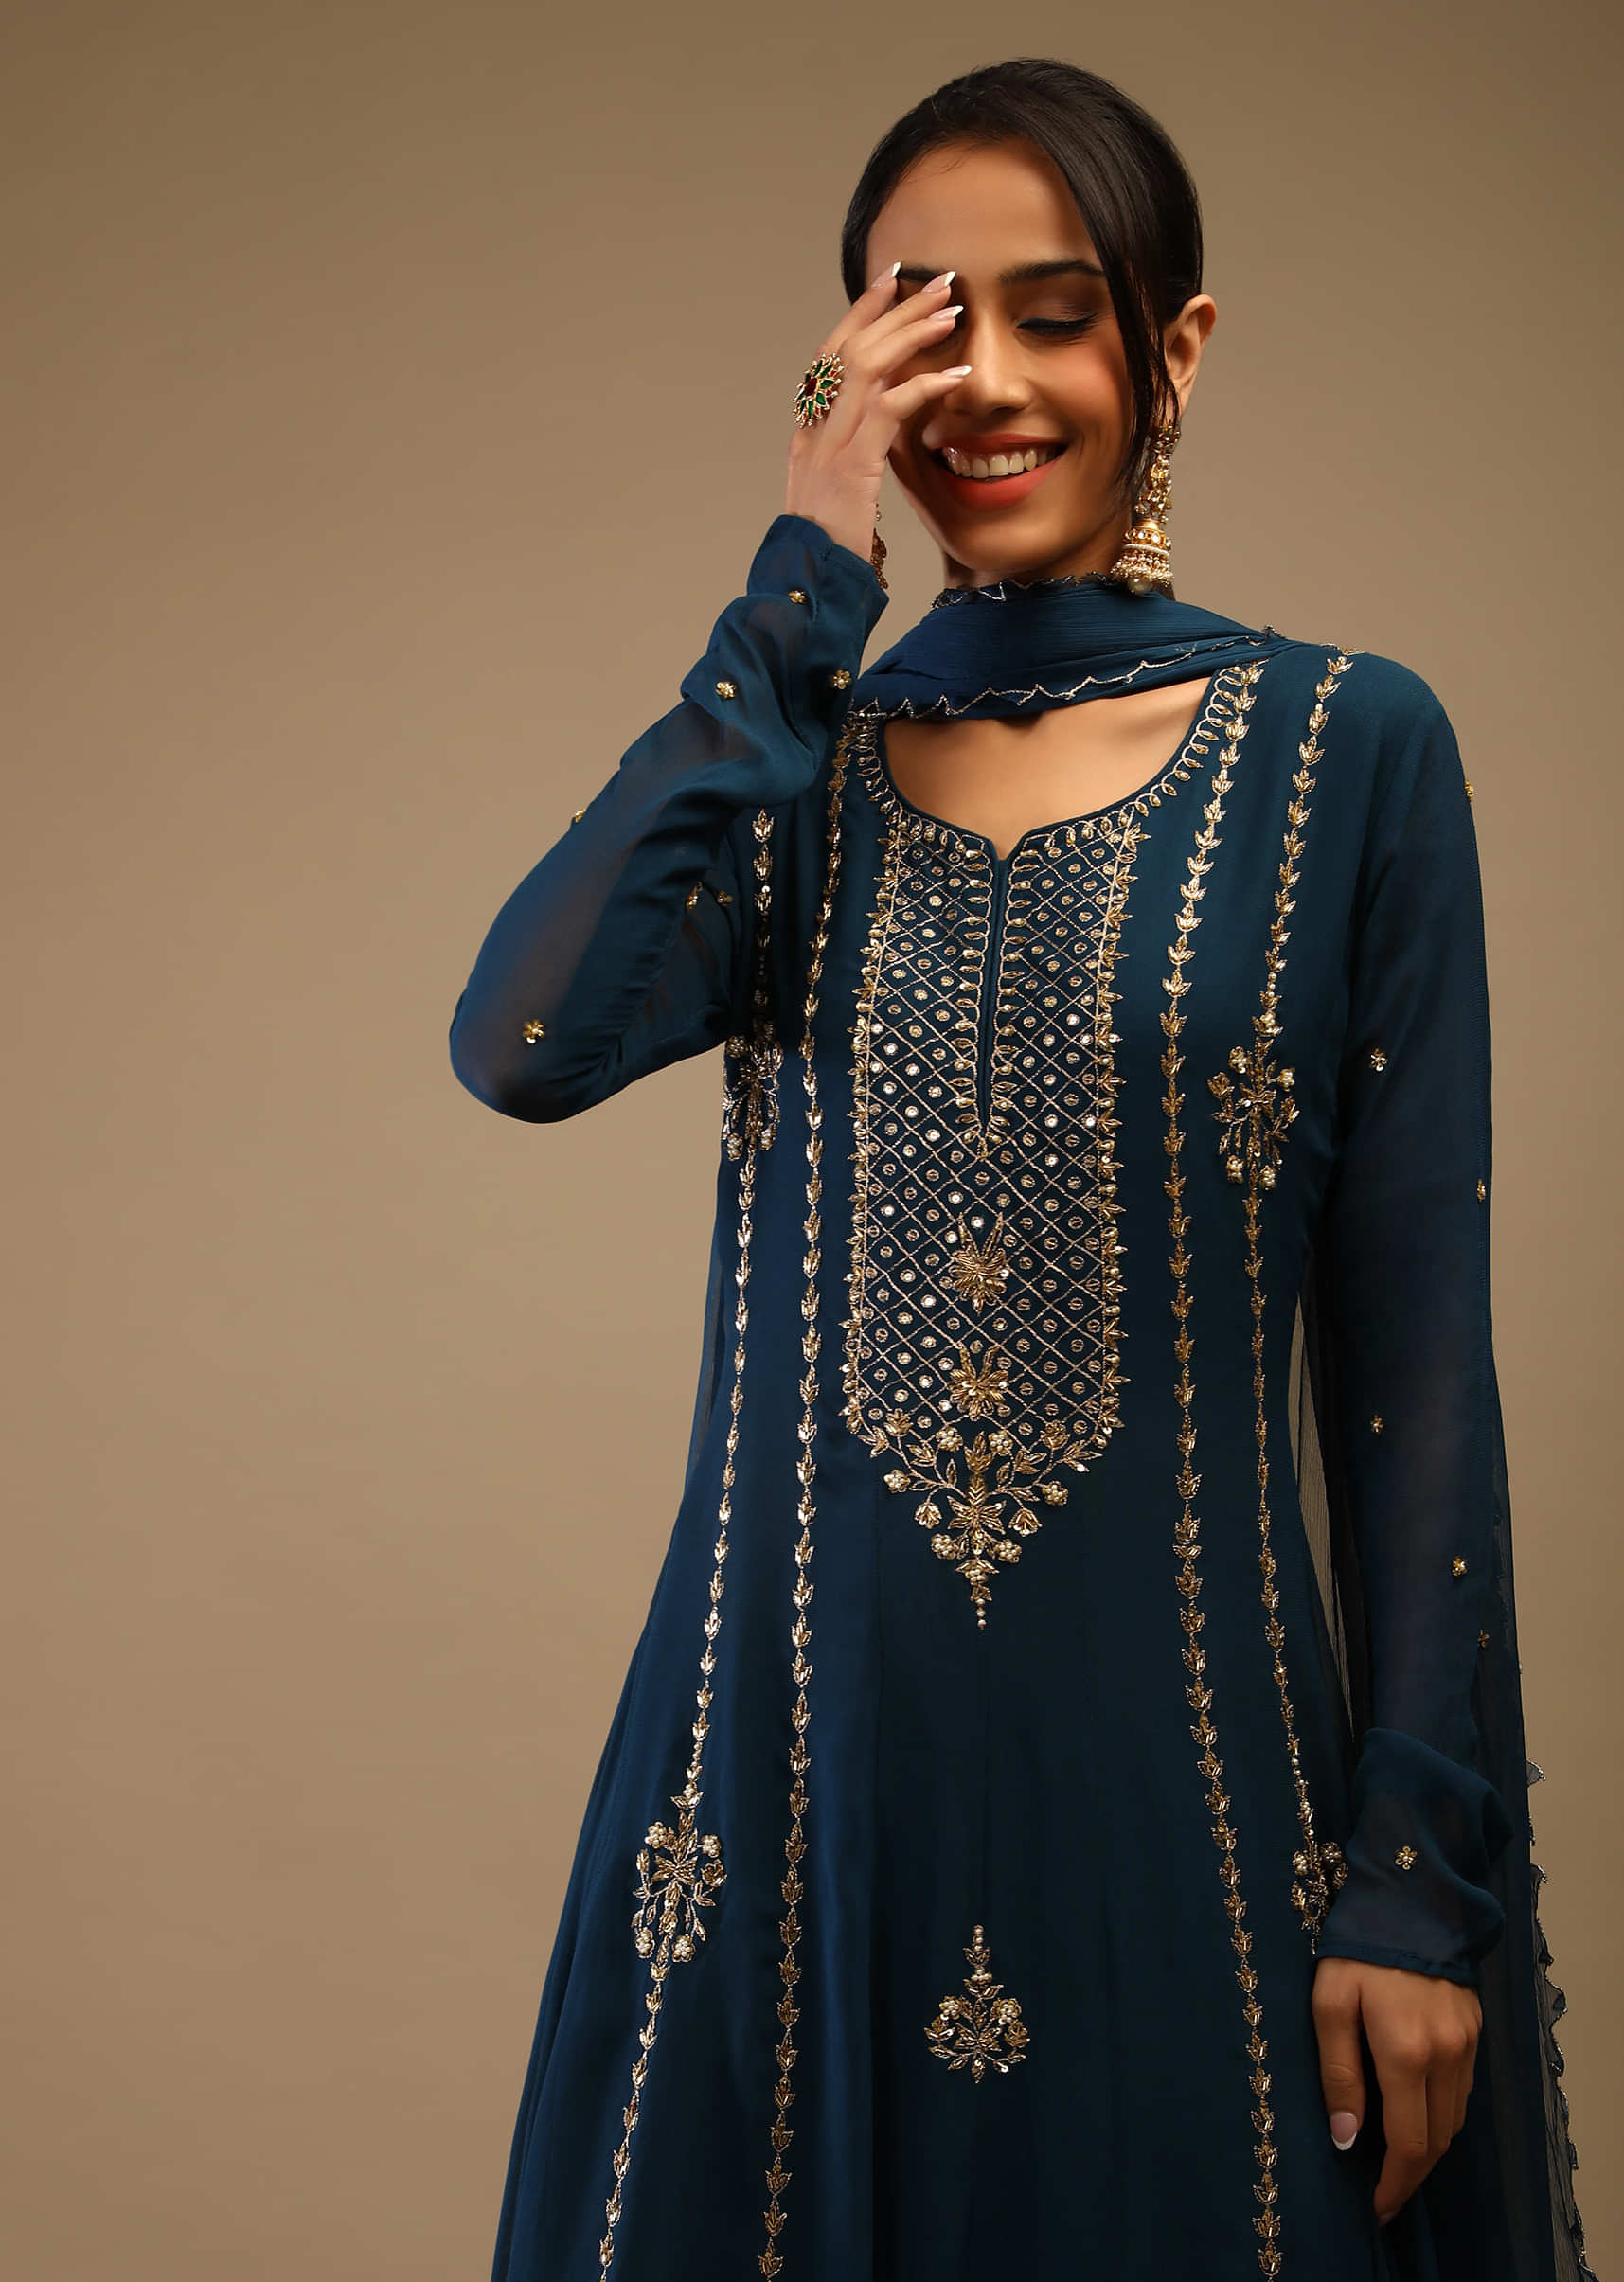 Sapphire Blue Anarkali Suit In Georgette With Zari And Cut Dana Embroidered Floral And Ethnic Motifs  